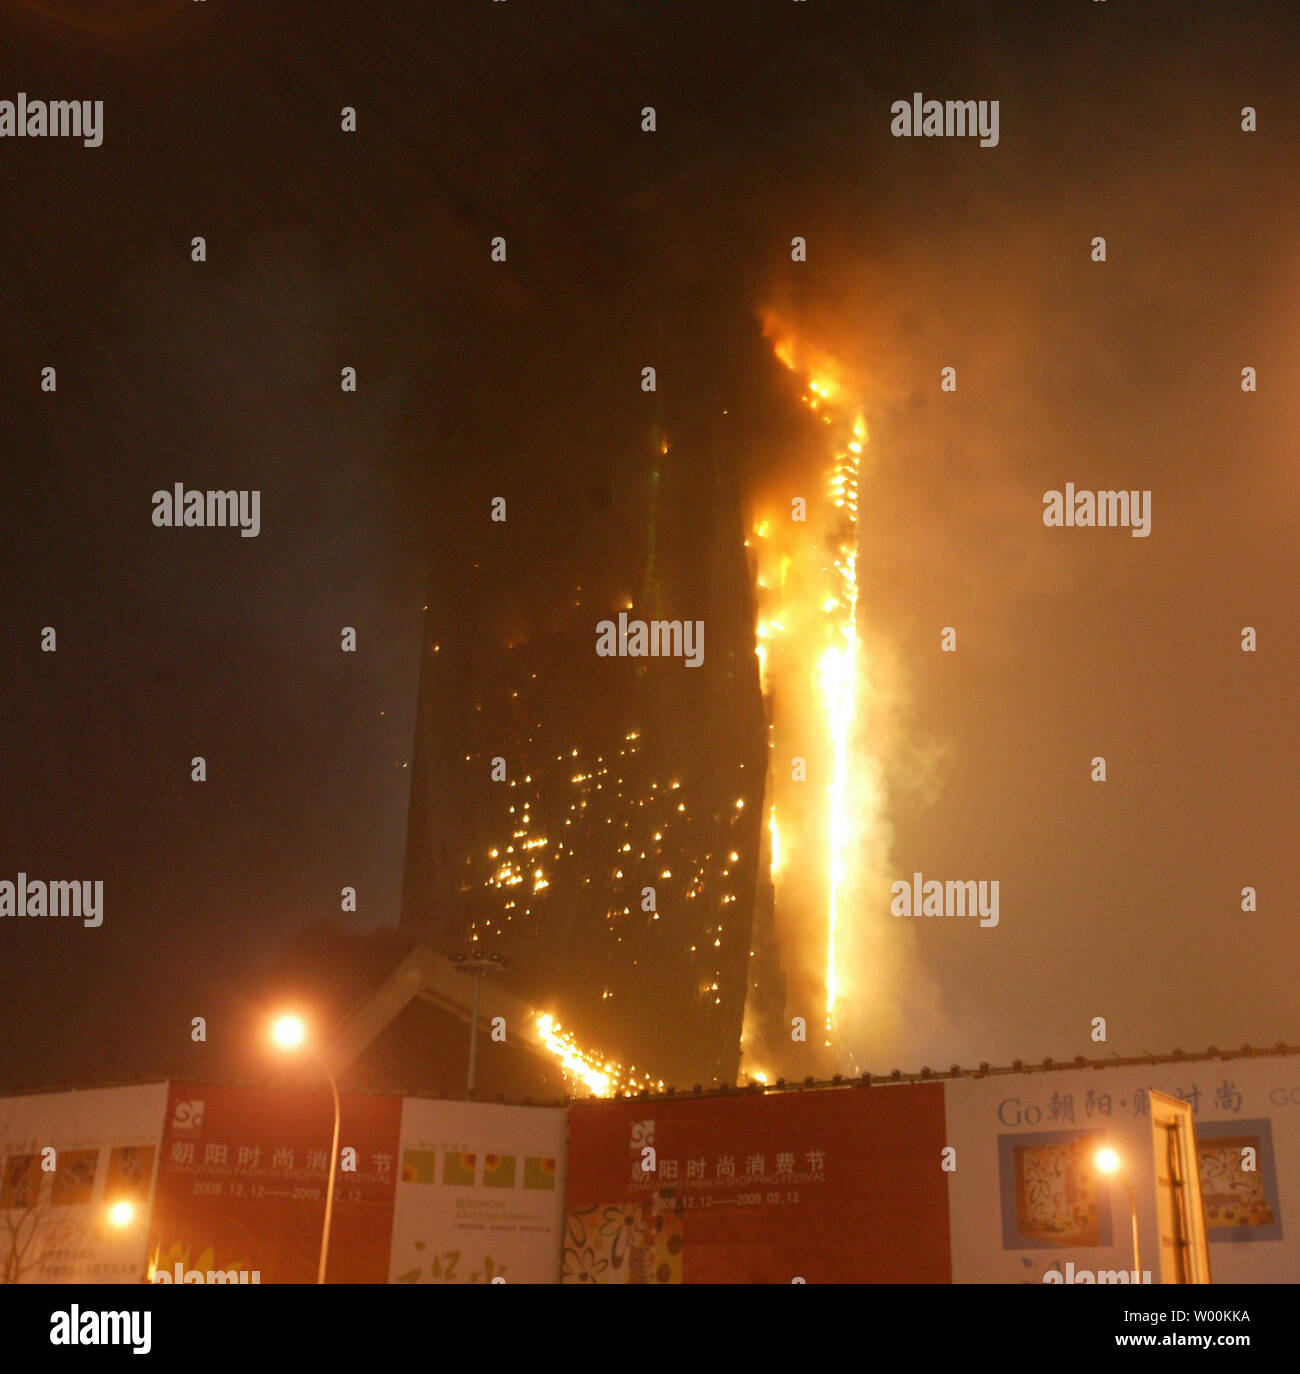 Fire rages through the under-construction Mandarin Oriental hotel, which is part of China Central TelevisionÕs new headquarters complex in downtown Beijing February 09, 2009.   (UPI Photo/Stephen Shaver) Stock Photo